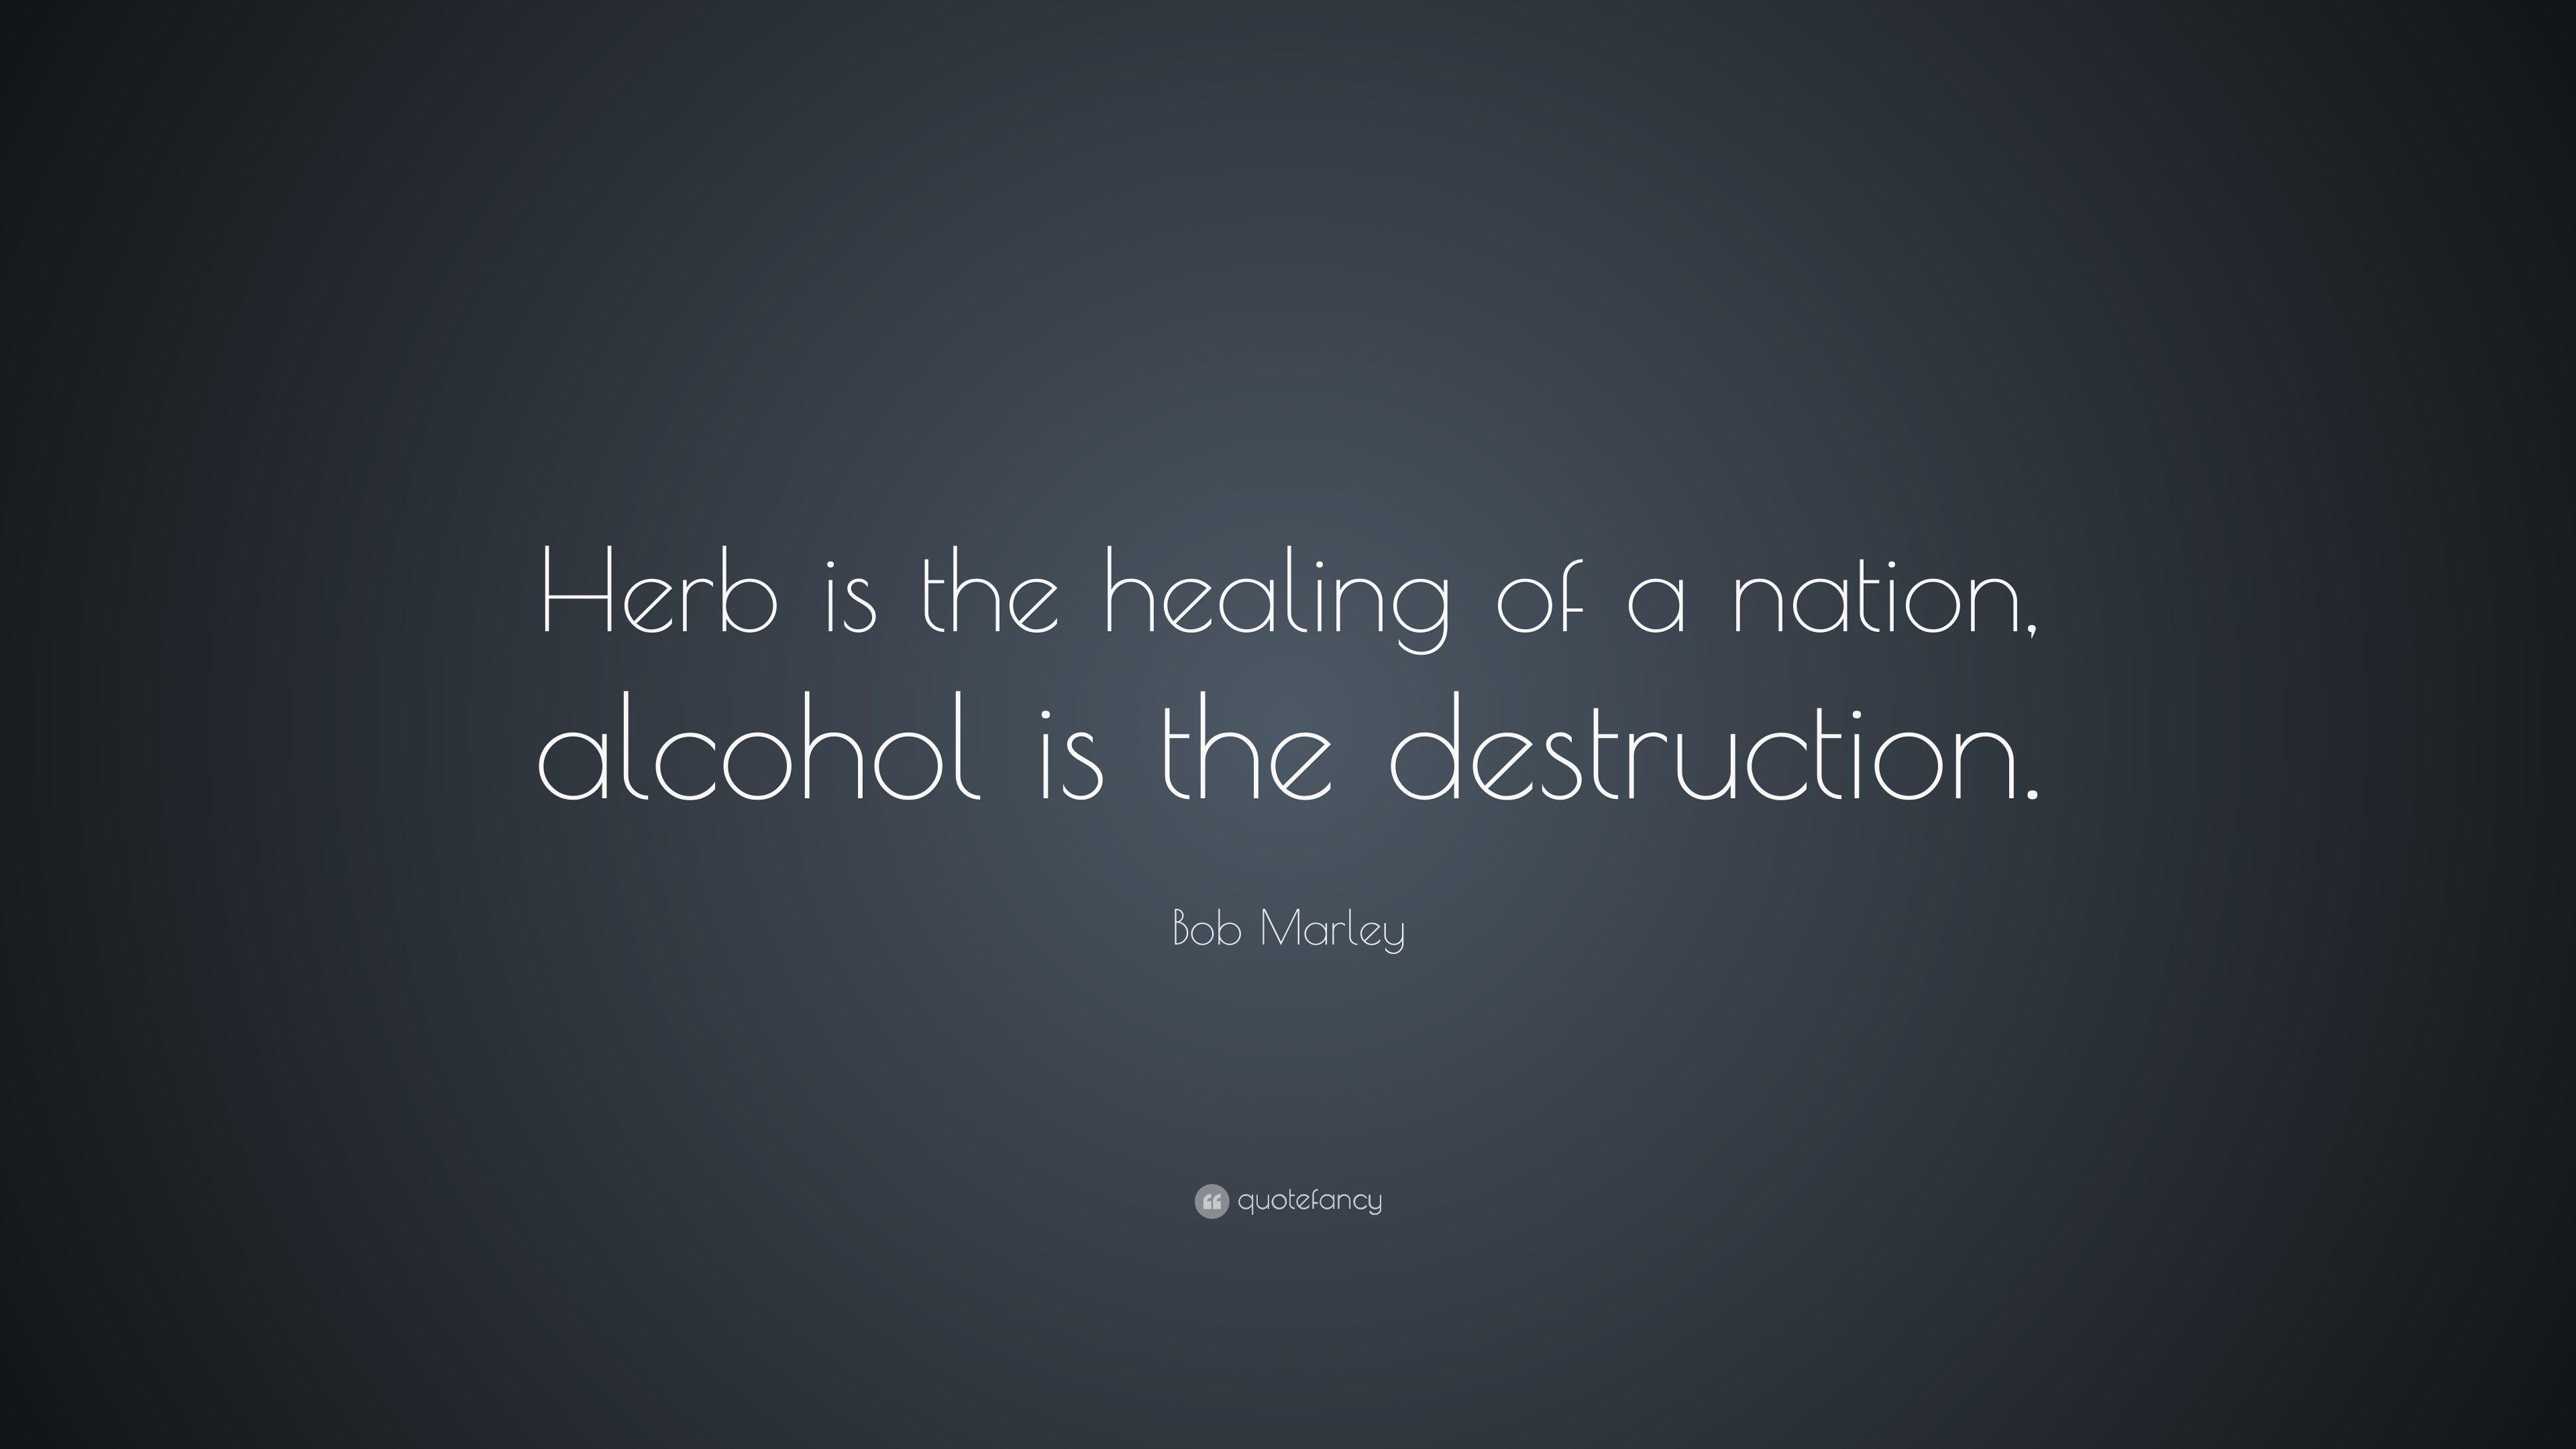 Bob Marley Quote: “Herb is the healing of a nation, alcohol is